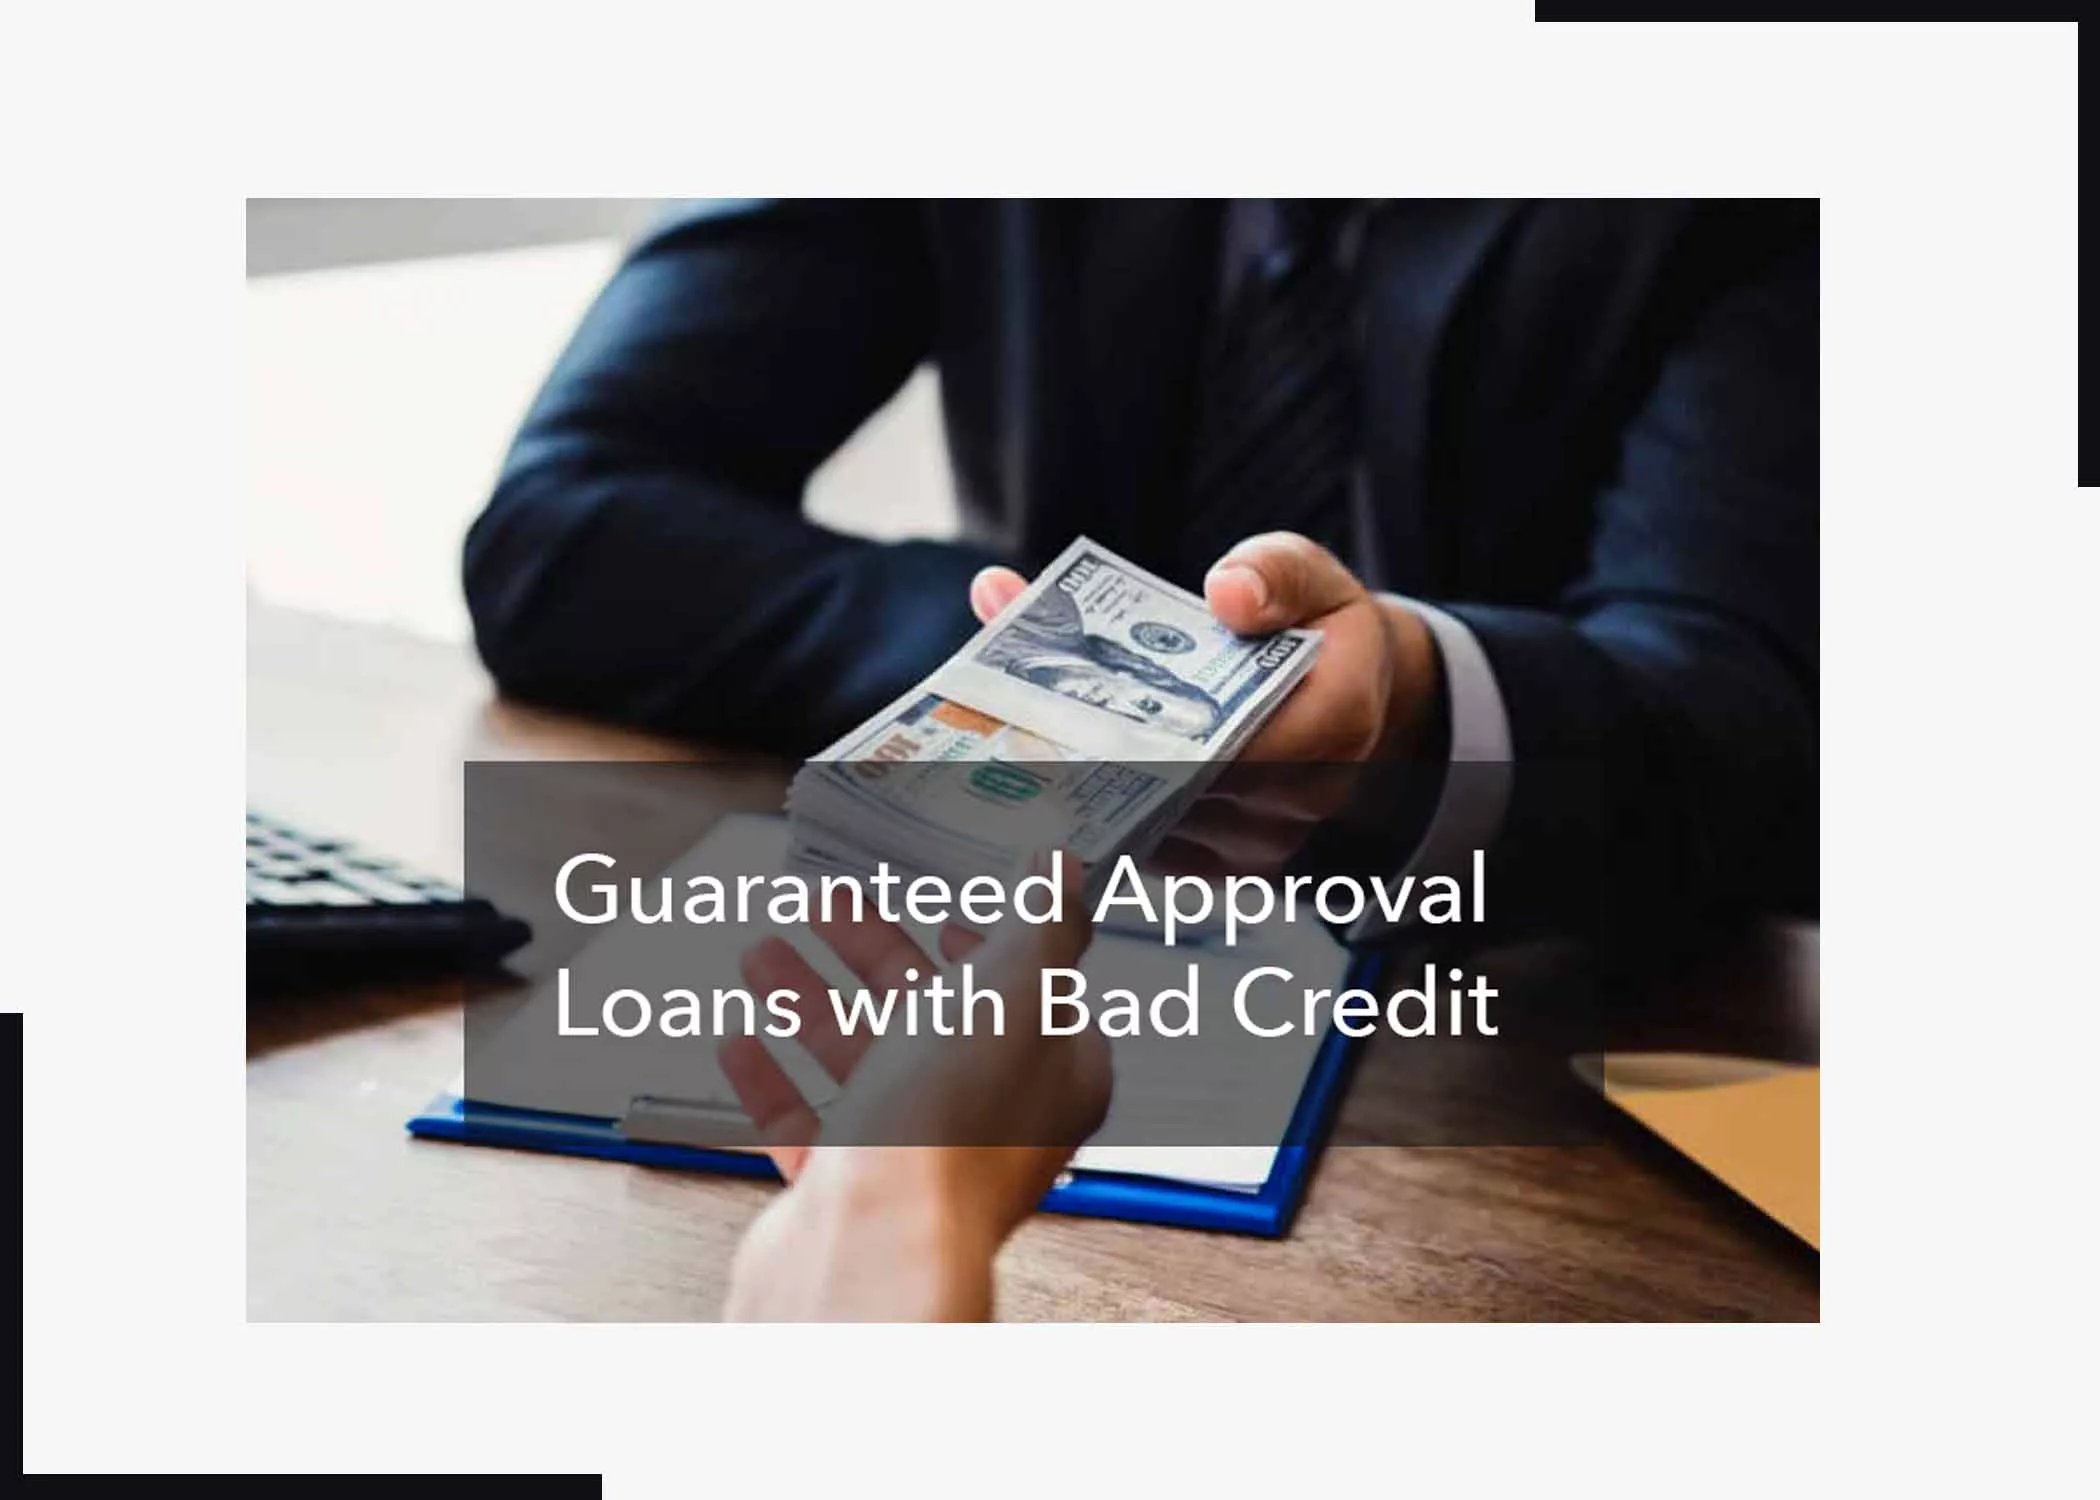 Guaranteed Approval Loans with Bad Credit